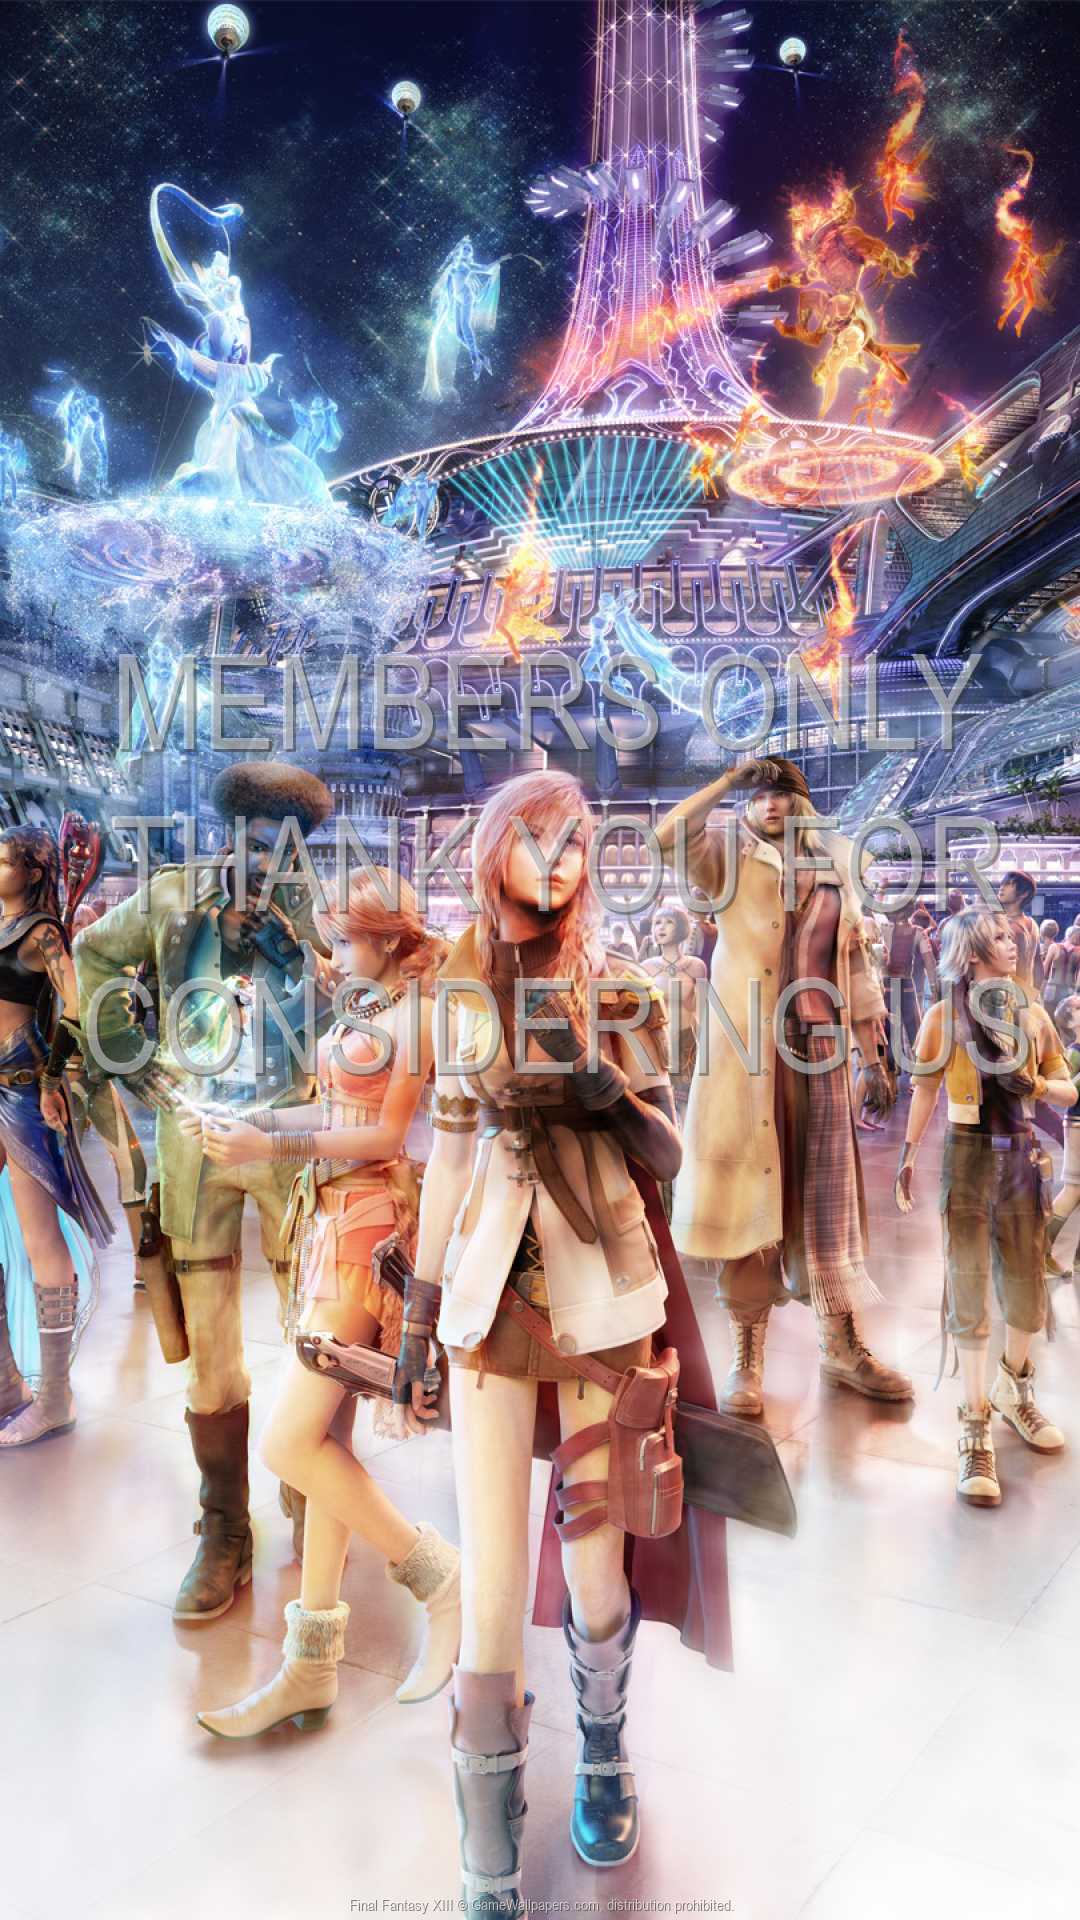 Final Fantasy XIII 1080p%20Vertical Mobile wallpaper or background 11